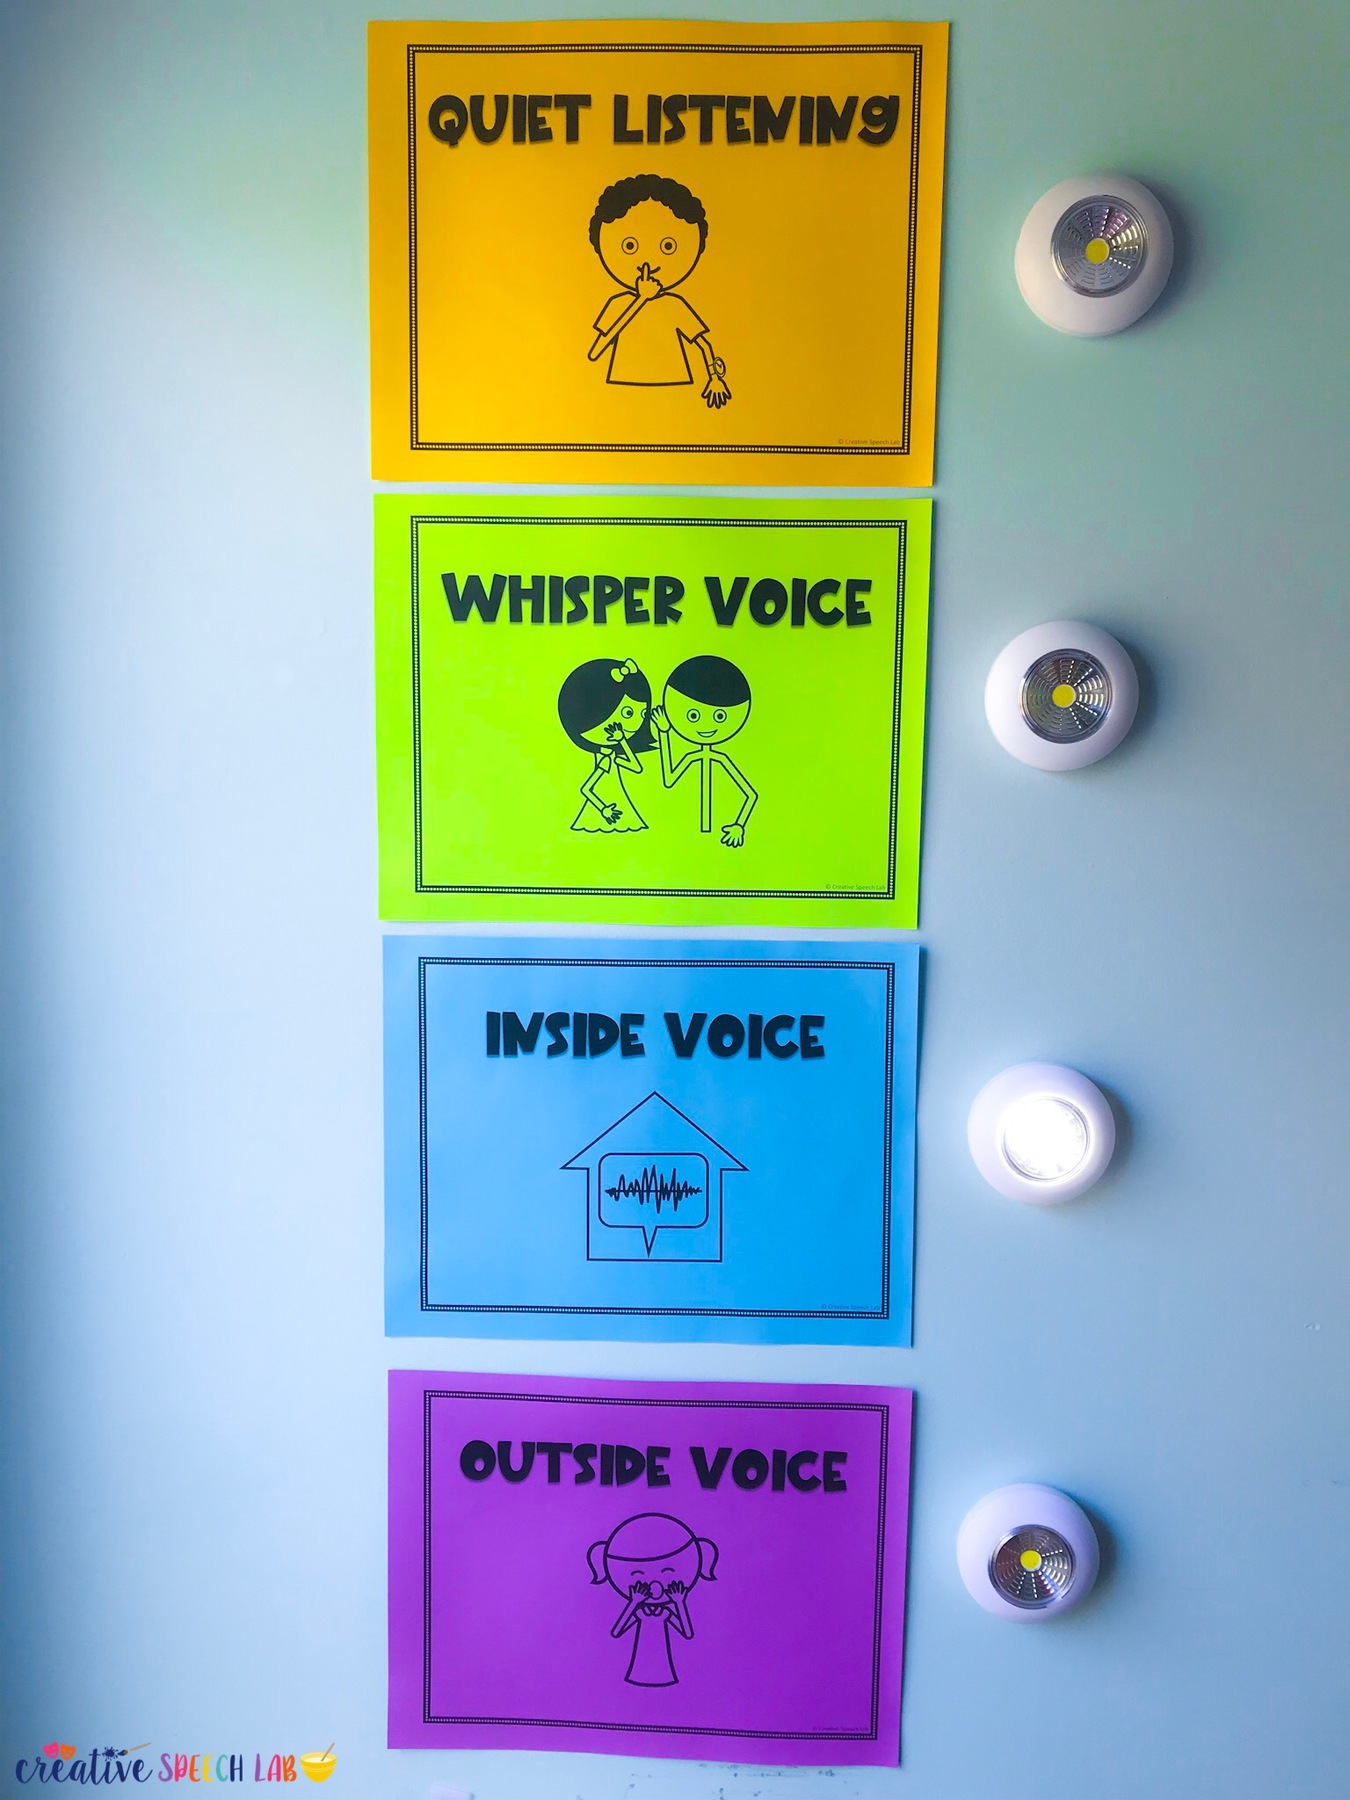 Speech therapy room decor displaying voice levels with tap lights